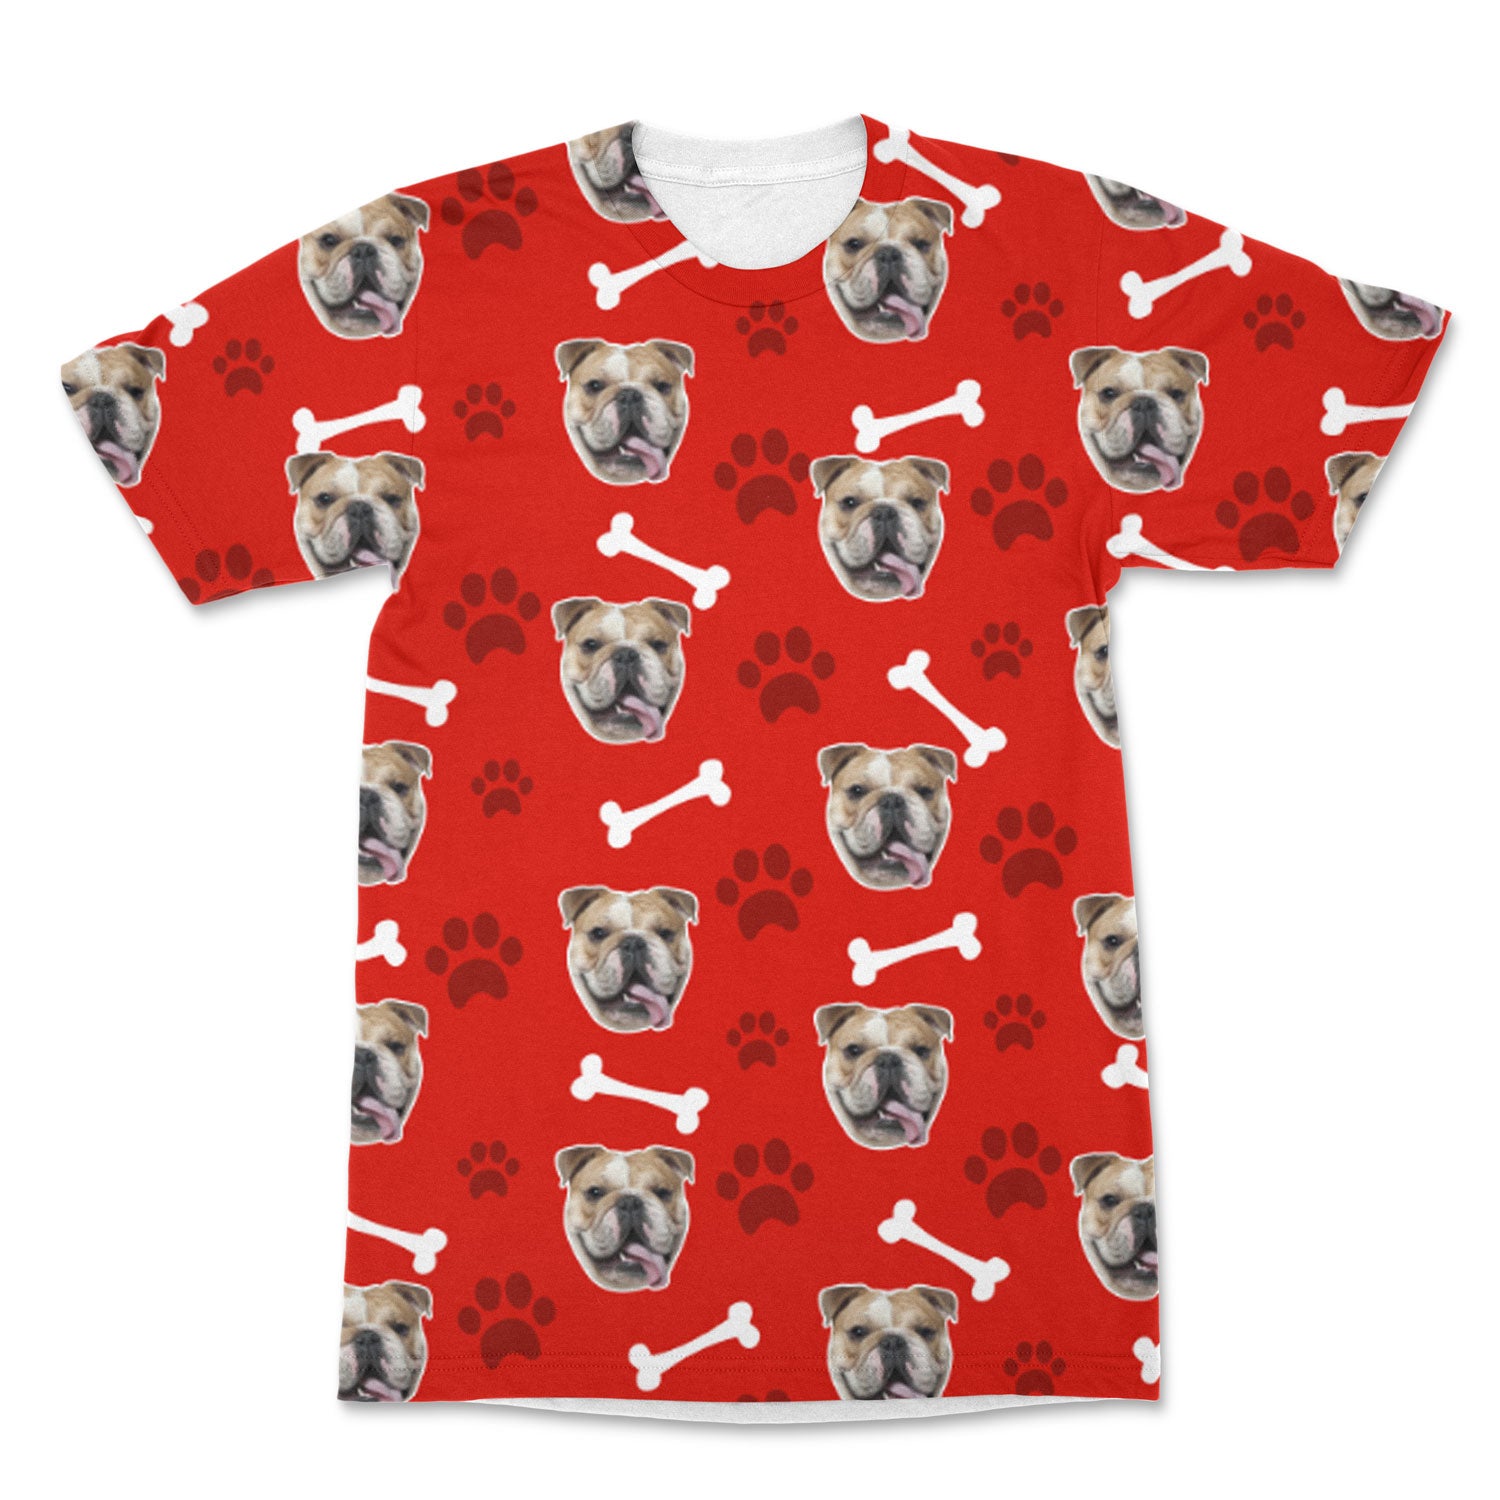 Your Dog Pattern All Over Unisex T-Shirt